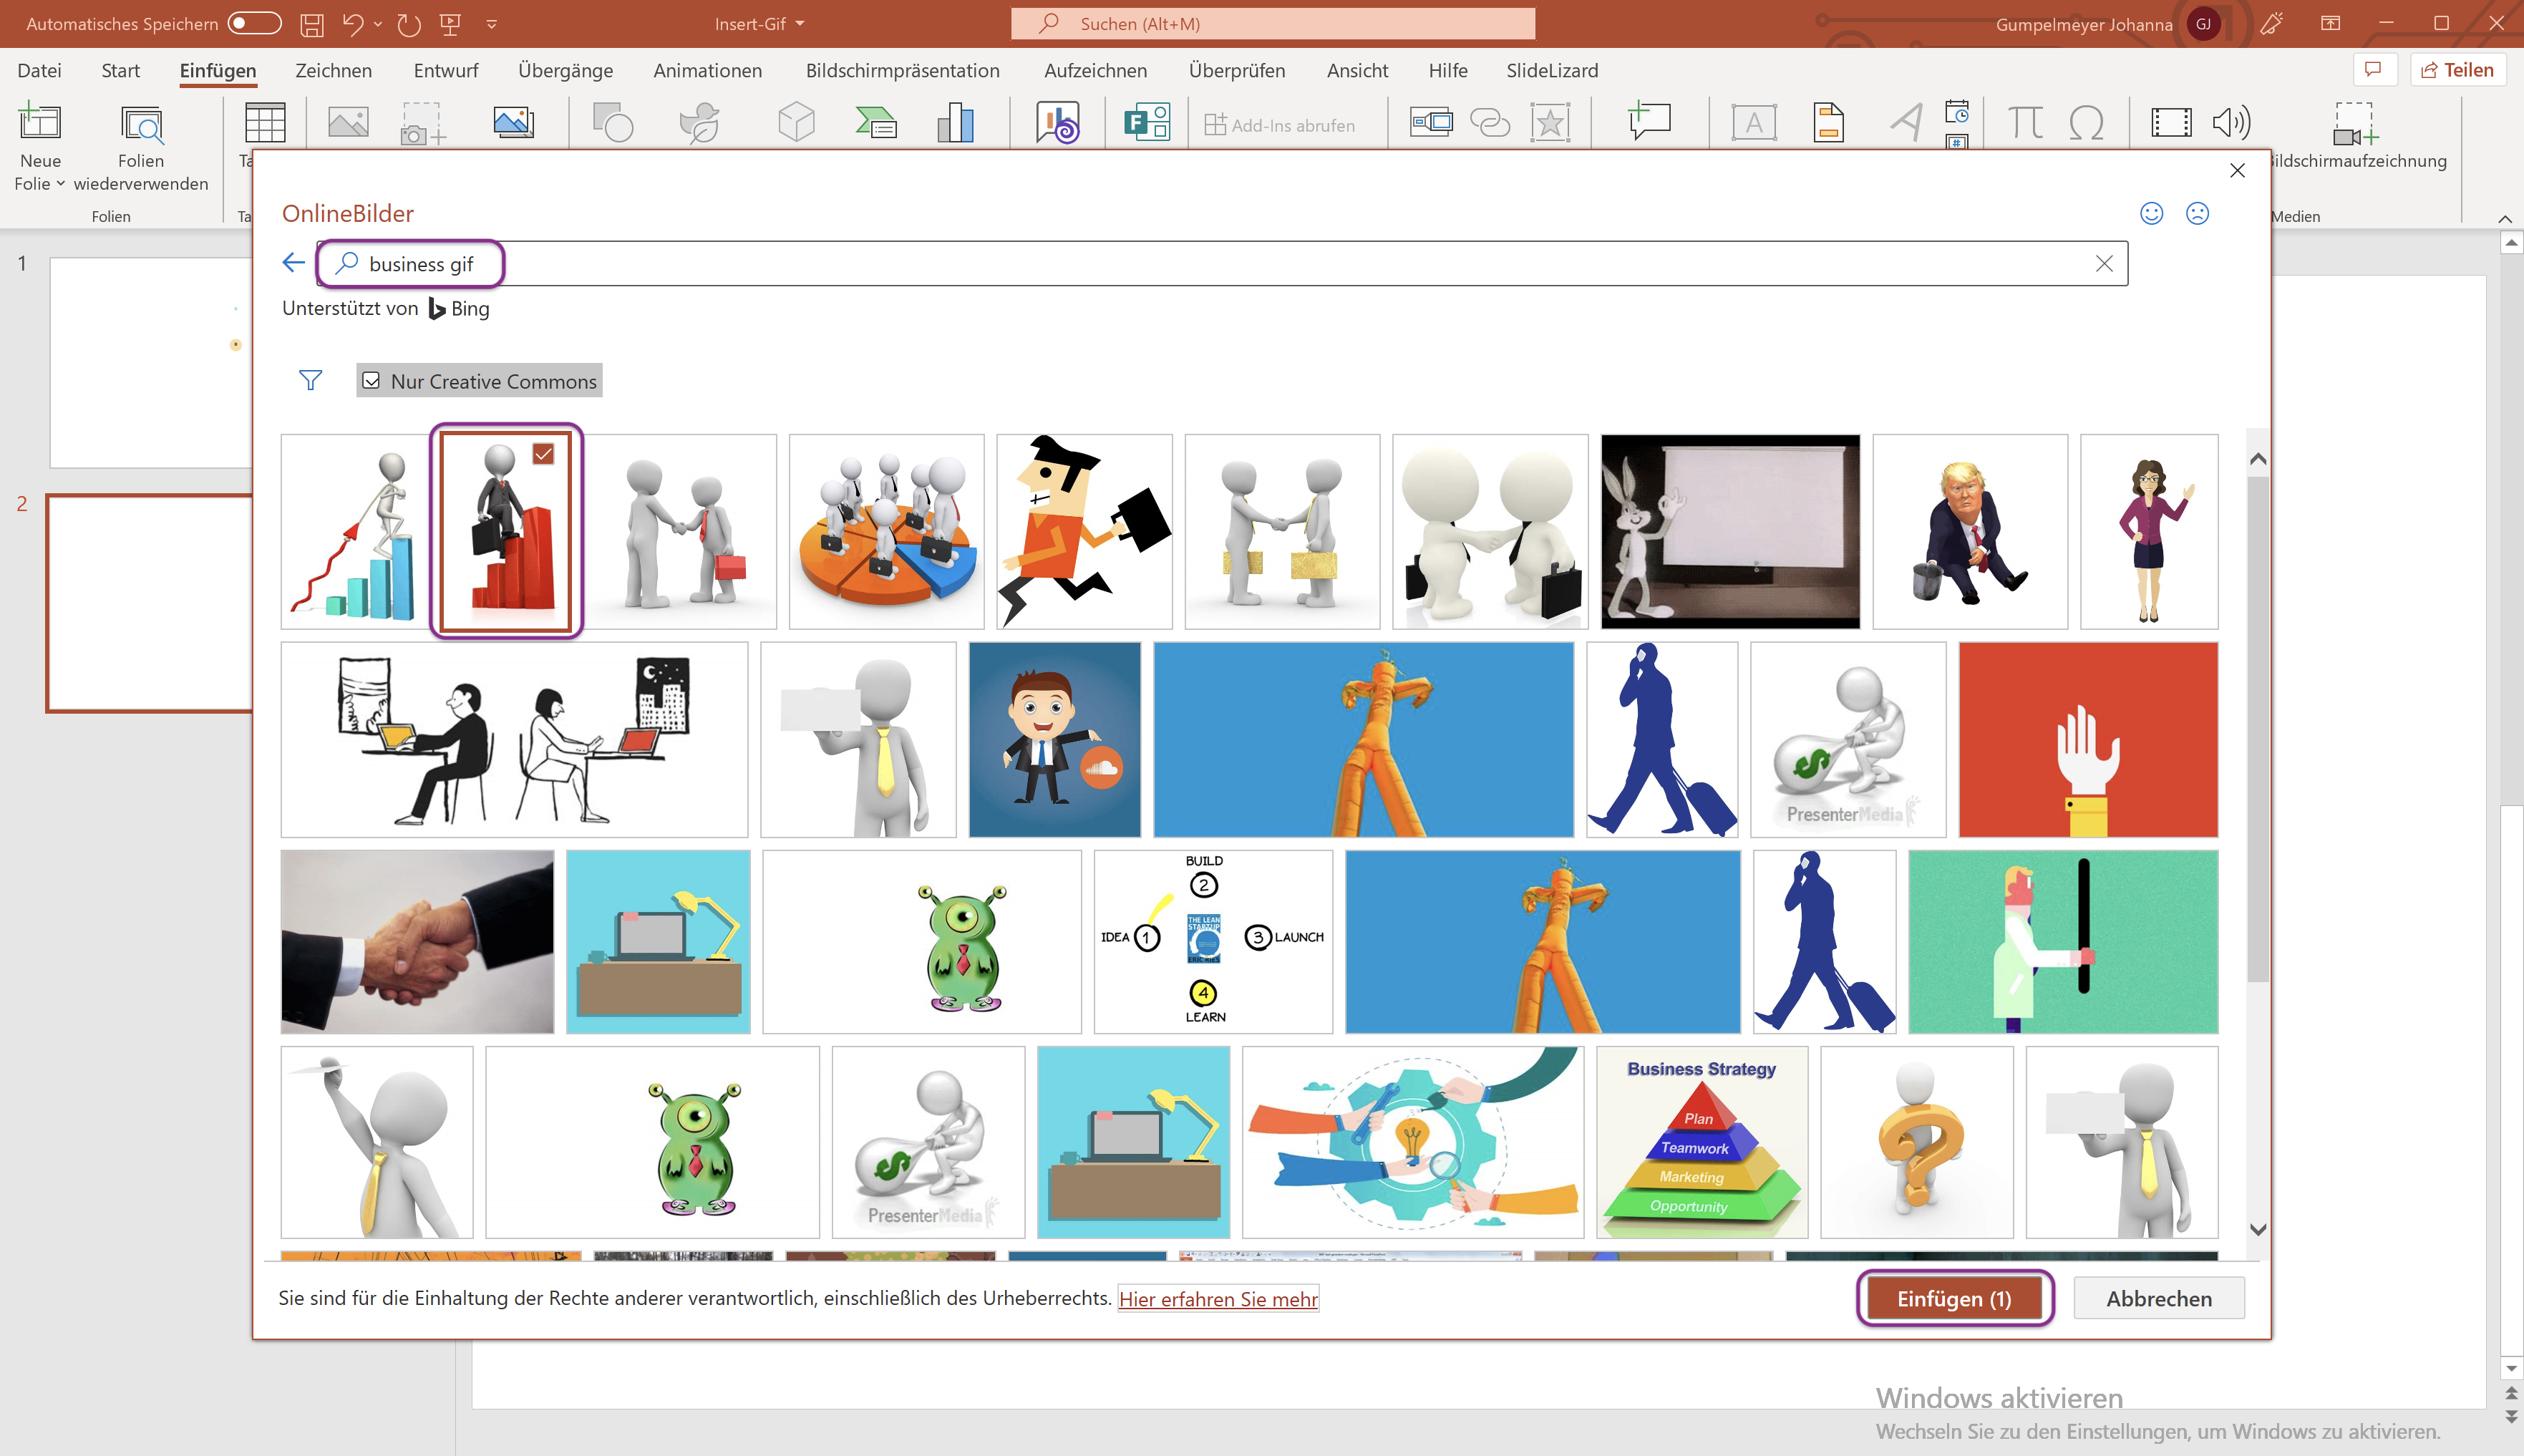 Create and insert GIFs in PowerPoint (2022)